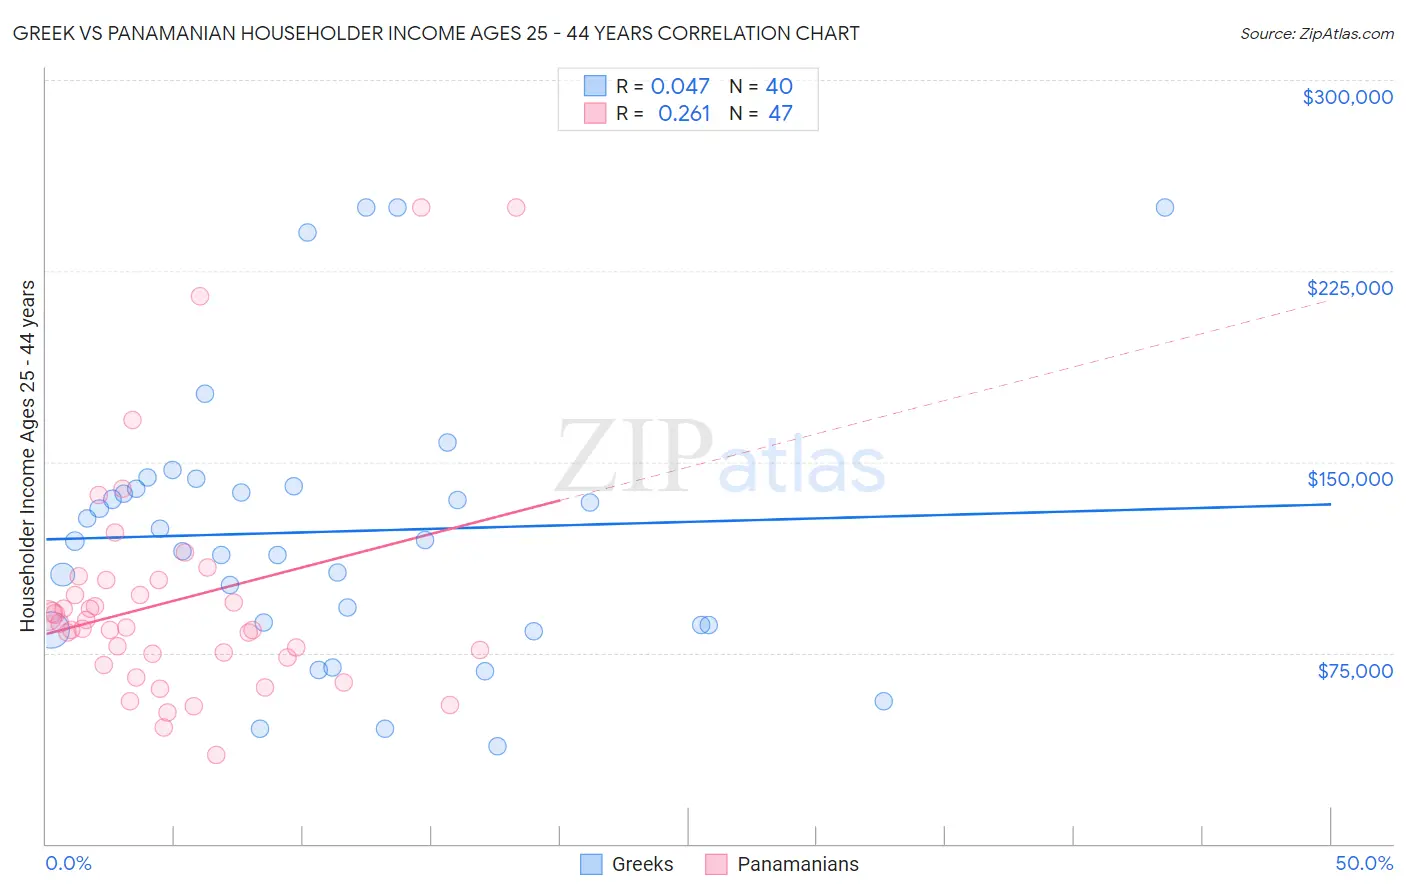 Greek vs Panamanian Householder Income Ages 25 - 44 years